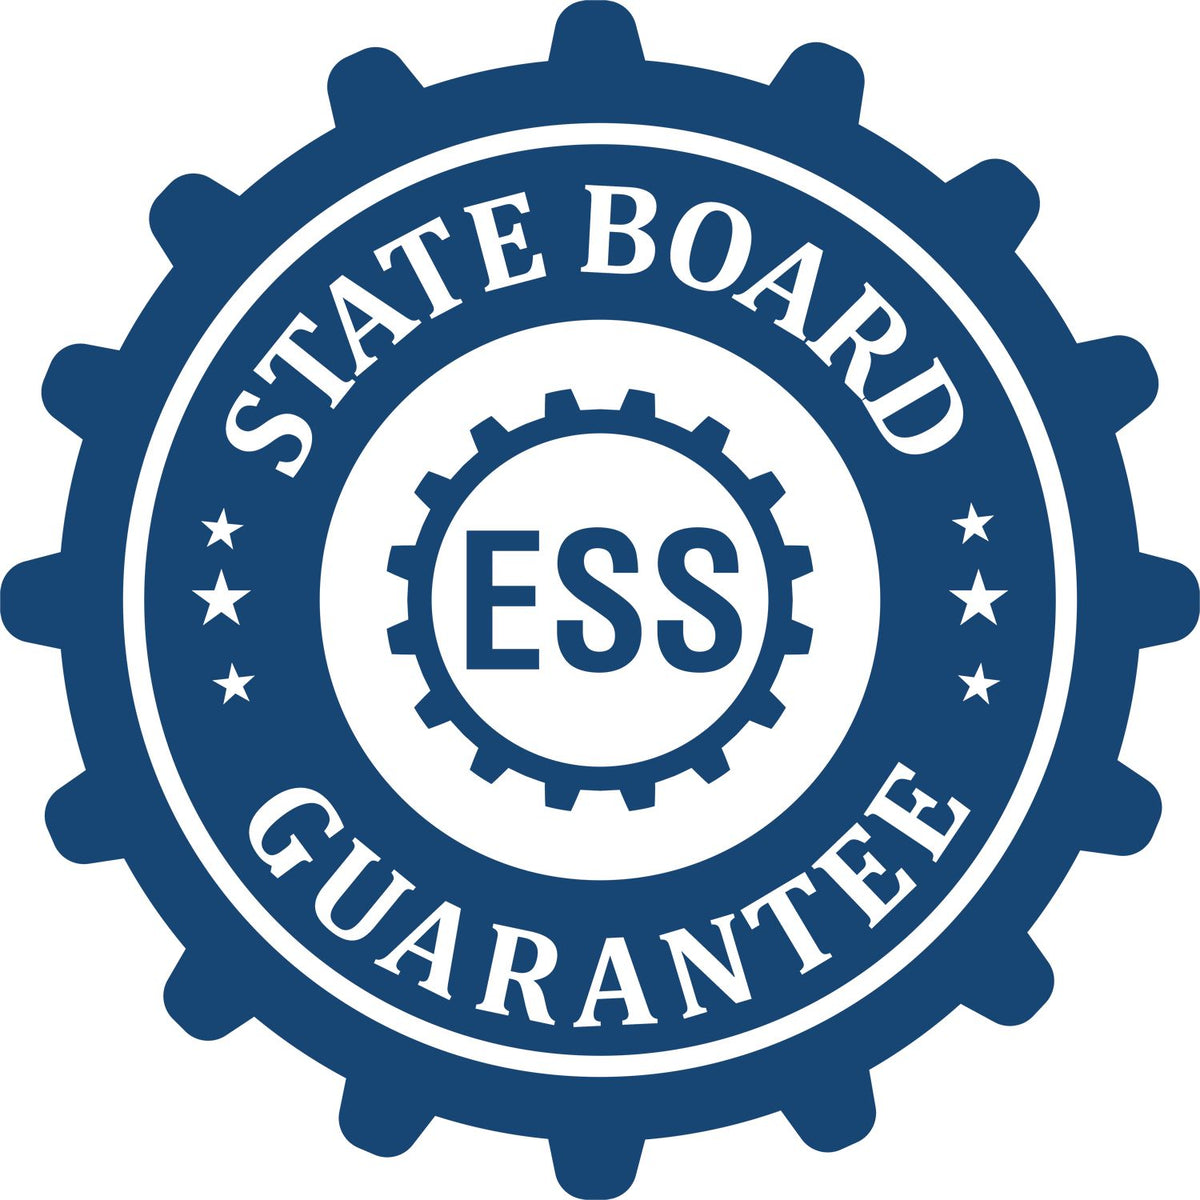 An emblem in a gear shape illustrating a state board guarantee for the Soft Kansas Professional Engineer Seal product.